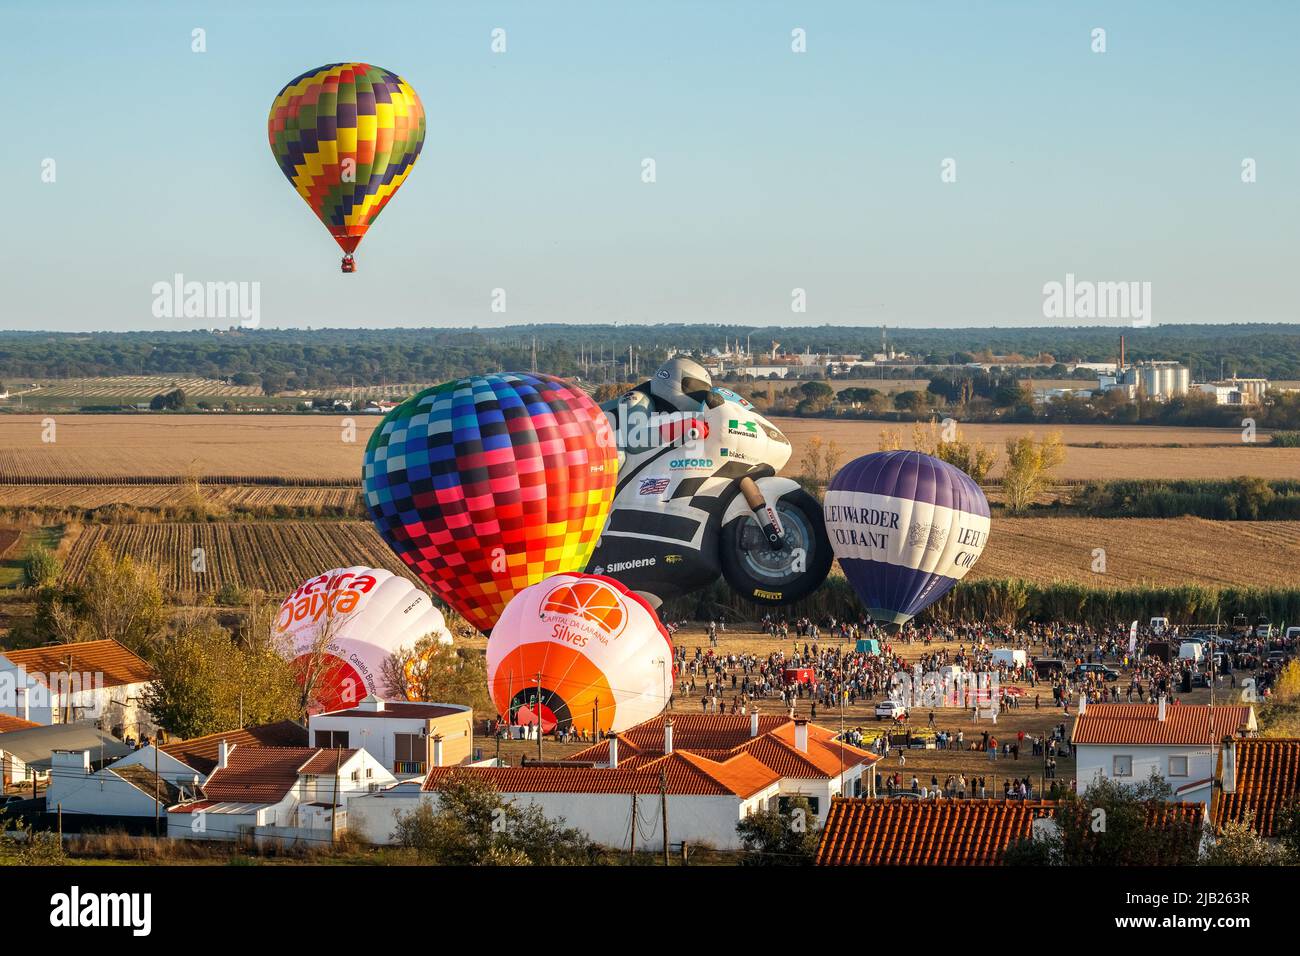 Coruche, Portugal - November 13, 2021: View of hot air balloons ready to take off and another balloon already in the air. Stock Photo